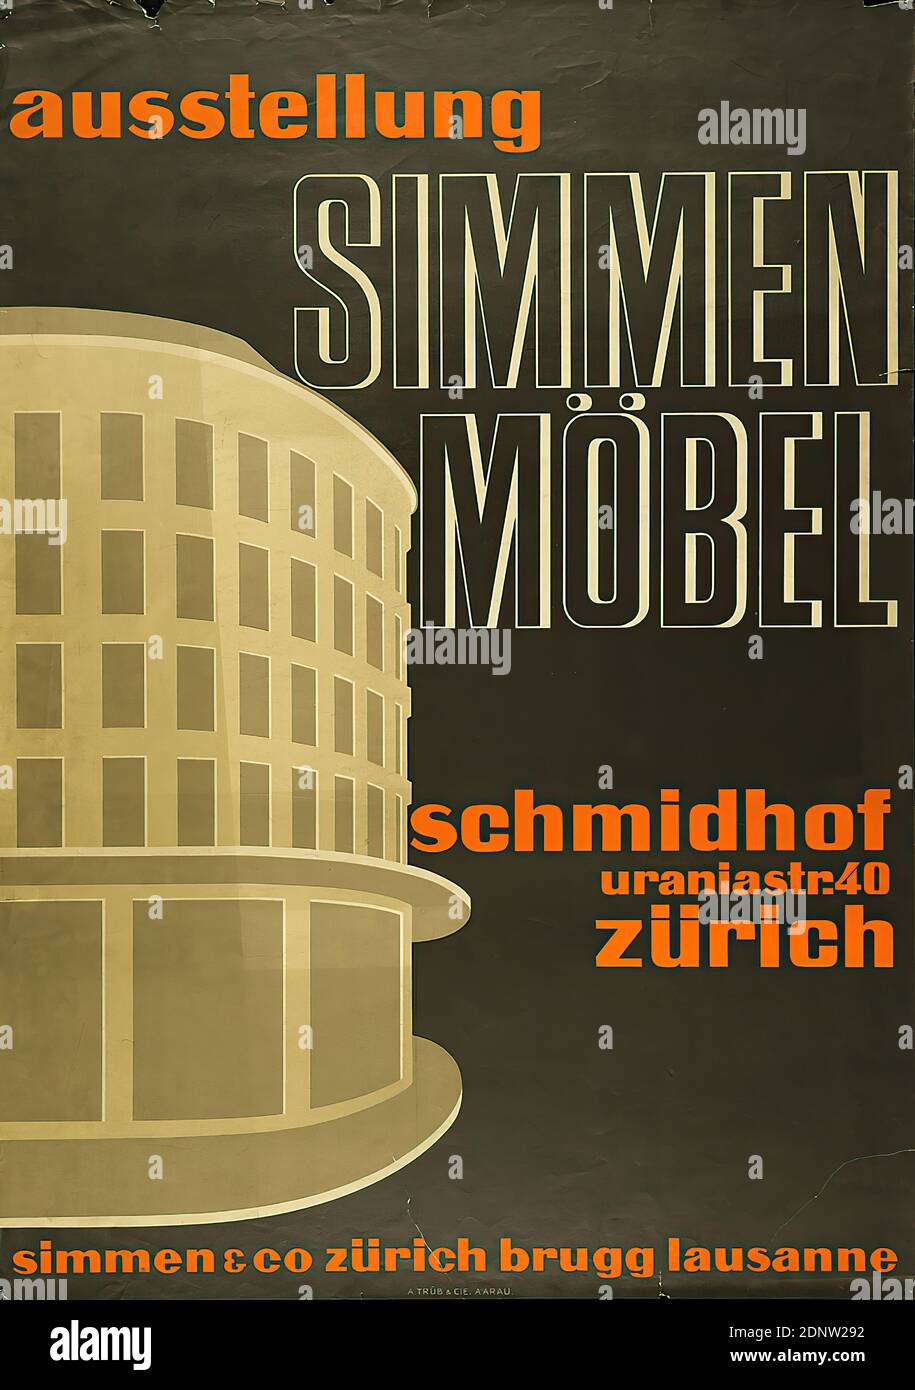 Walter Cyliax, A. Trüb & Cie, Exhibition. Simmen furniture. Zurich, lithograph, total: height: 128 cm; width: 90,5 cm, unsigned, exhibition posters, product and business advertising (posters), architecture Stock Photo